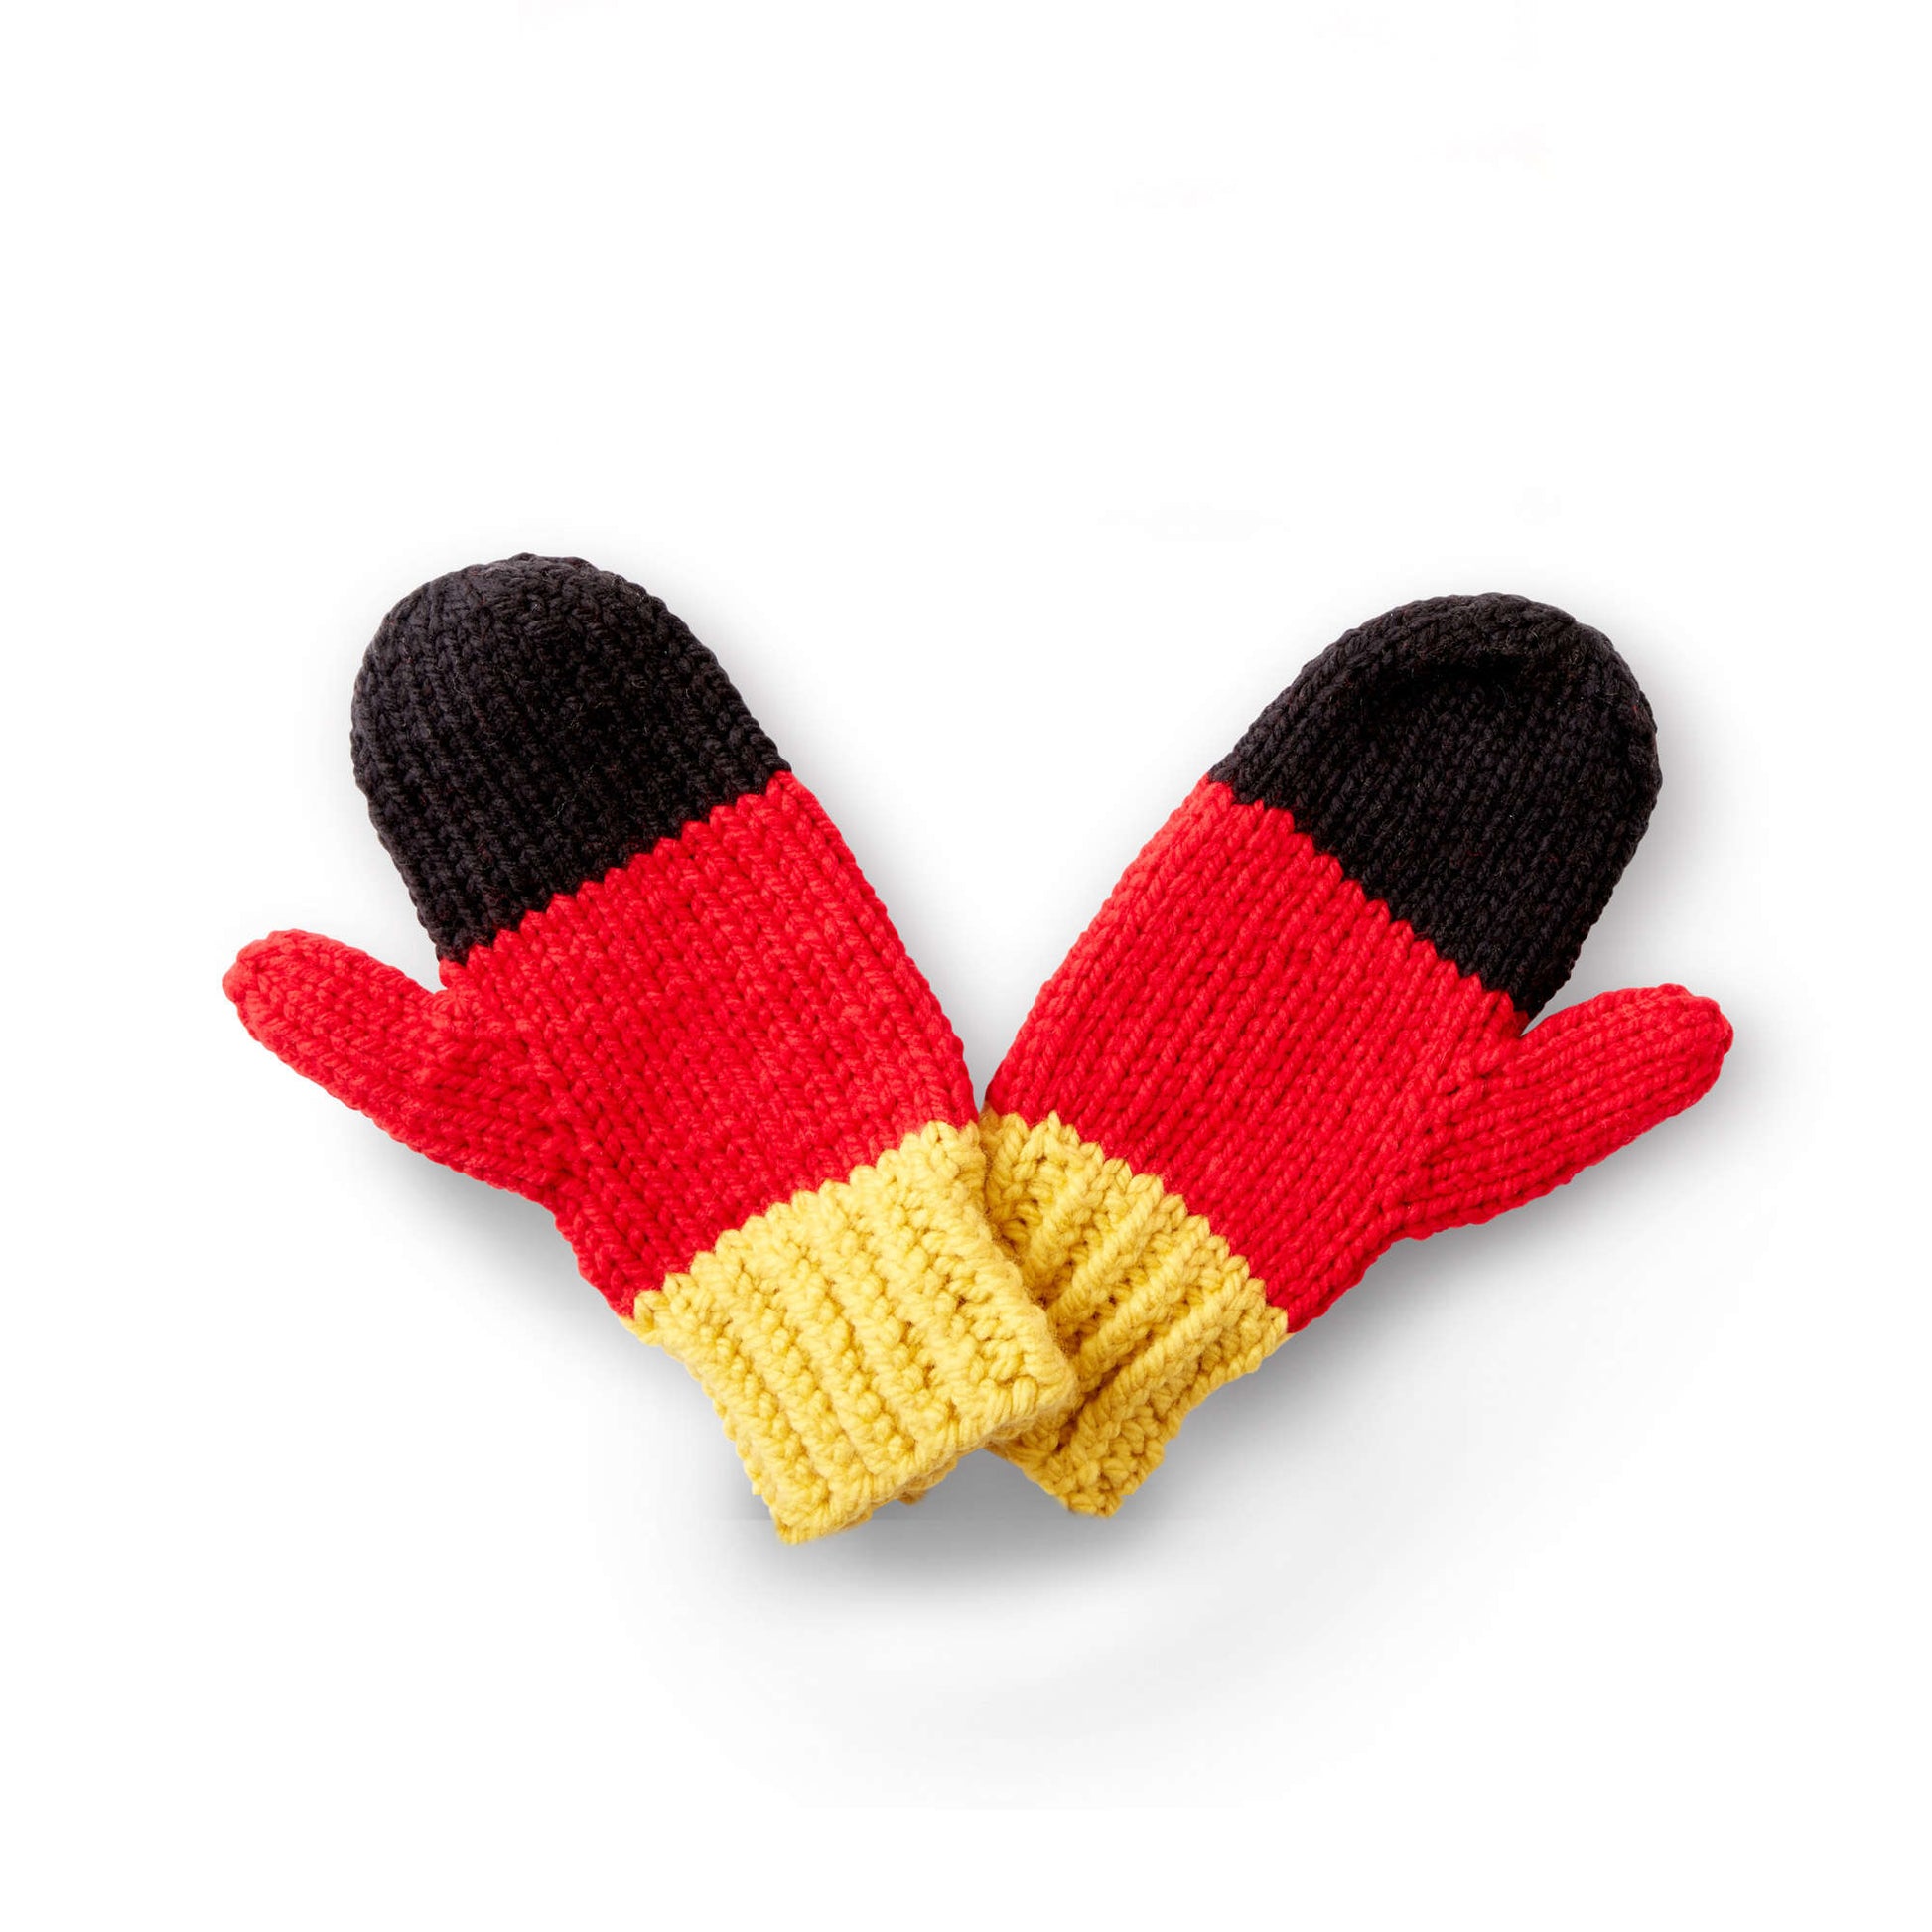 Bernat State Your Nation Knit Mittens 2 Color